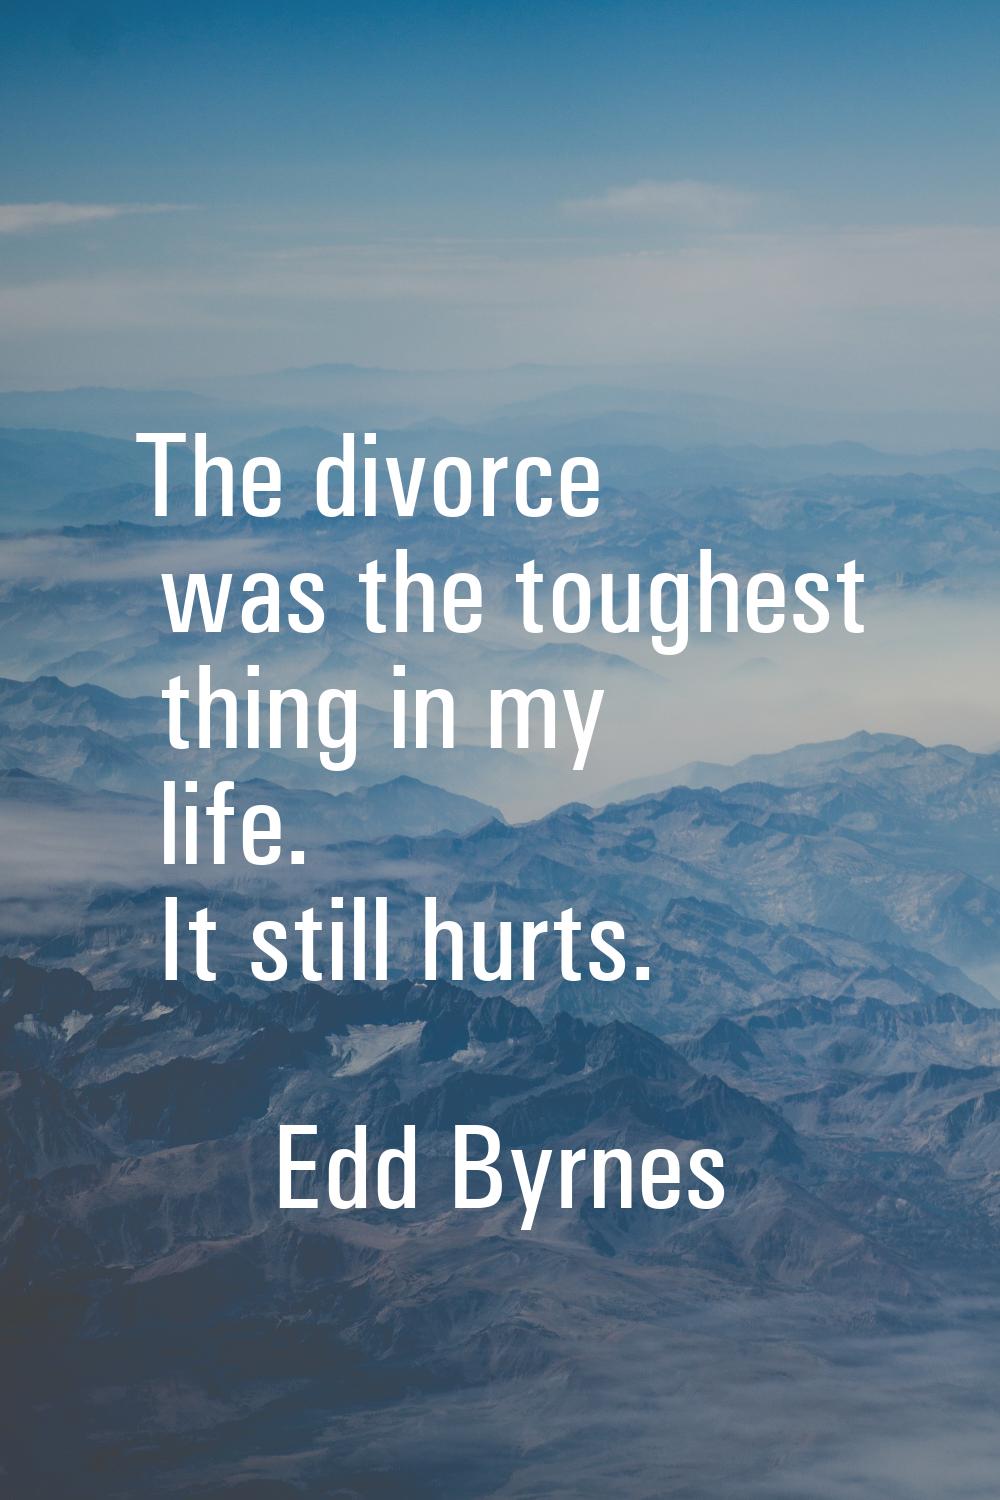 The divorce was the toughest thing in my life. It still hurts.